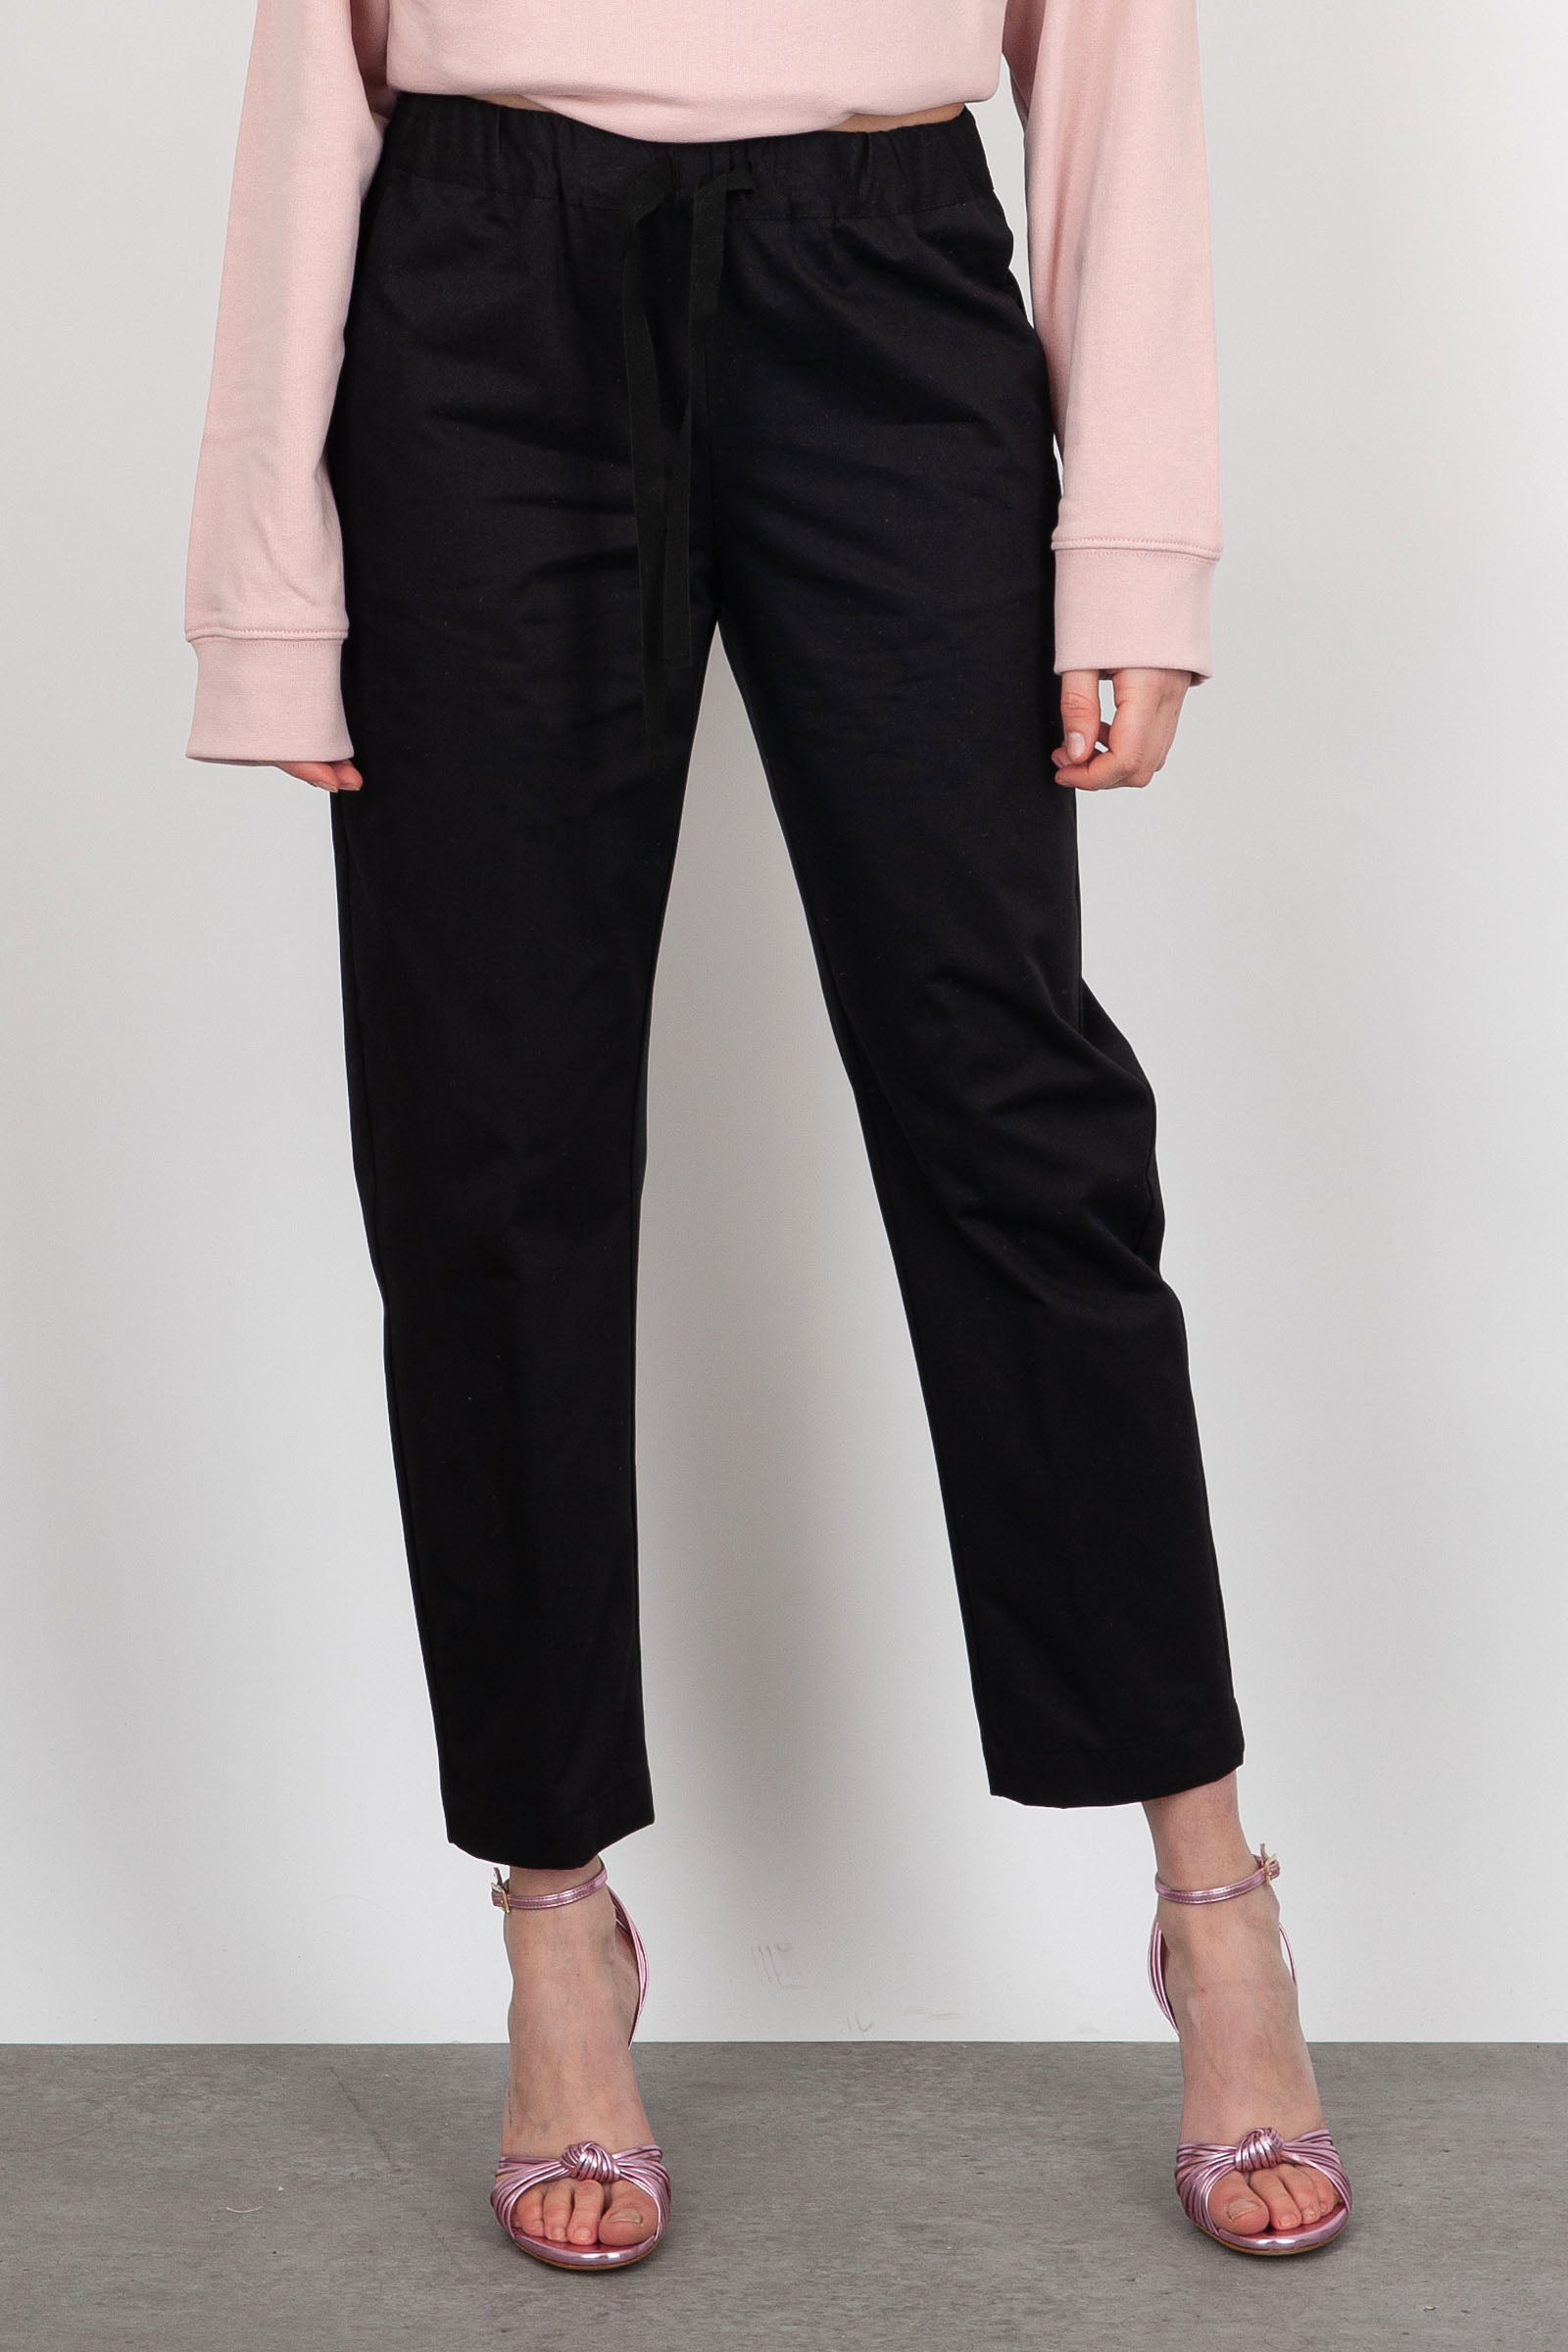 Semicouture Buddy Cotton Trousers in Black - 1